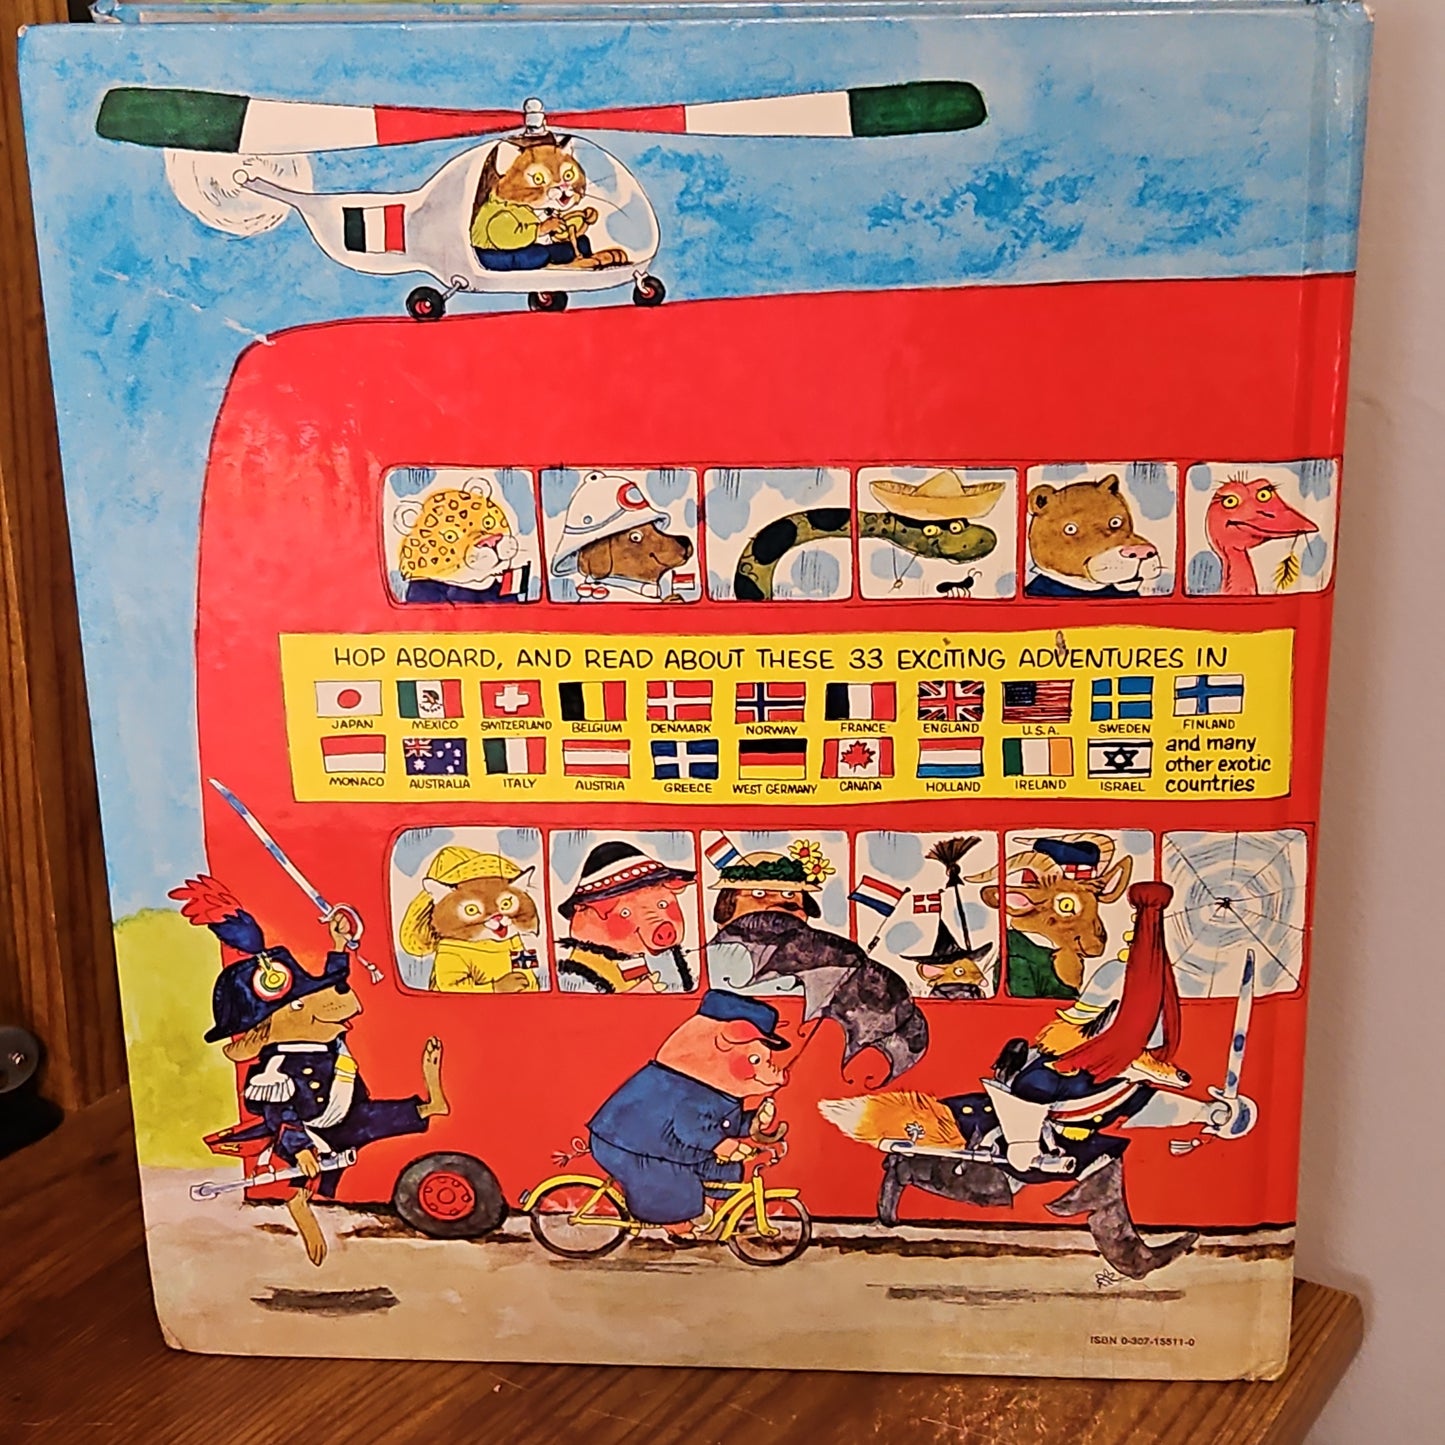 Busy, Busy World By Richard Scarry 1965